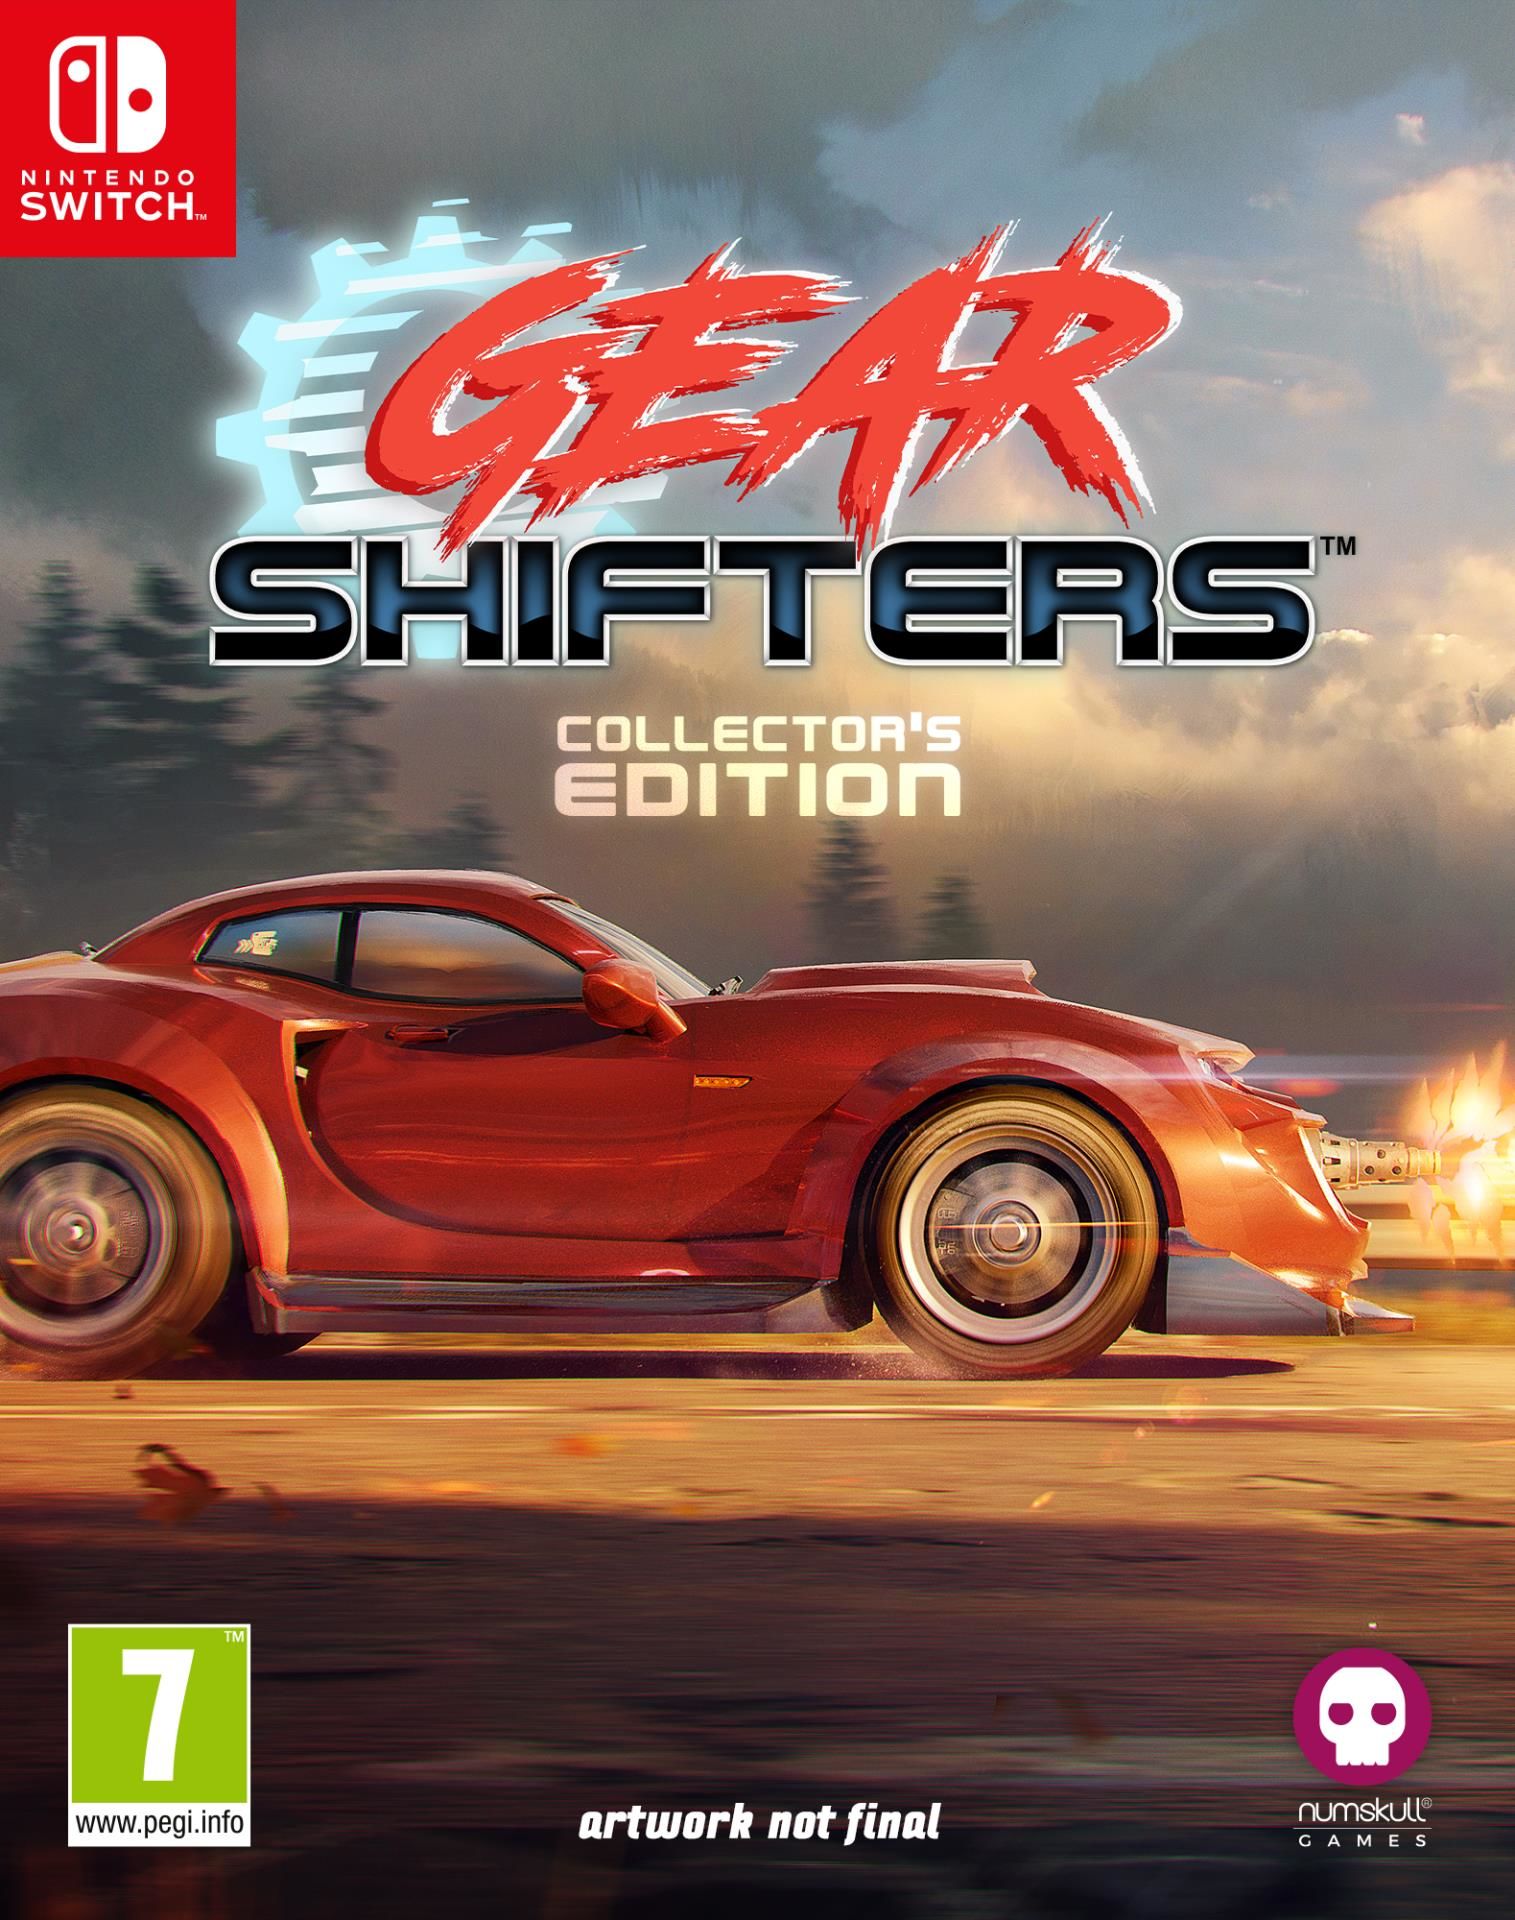 Gearshifters Collector\'s Edition